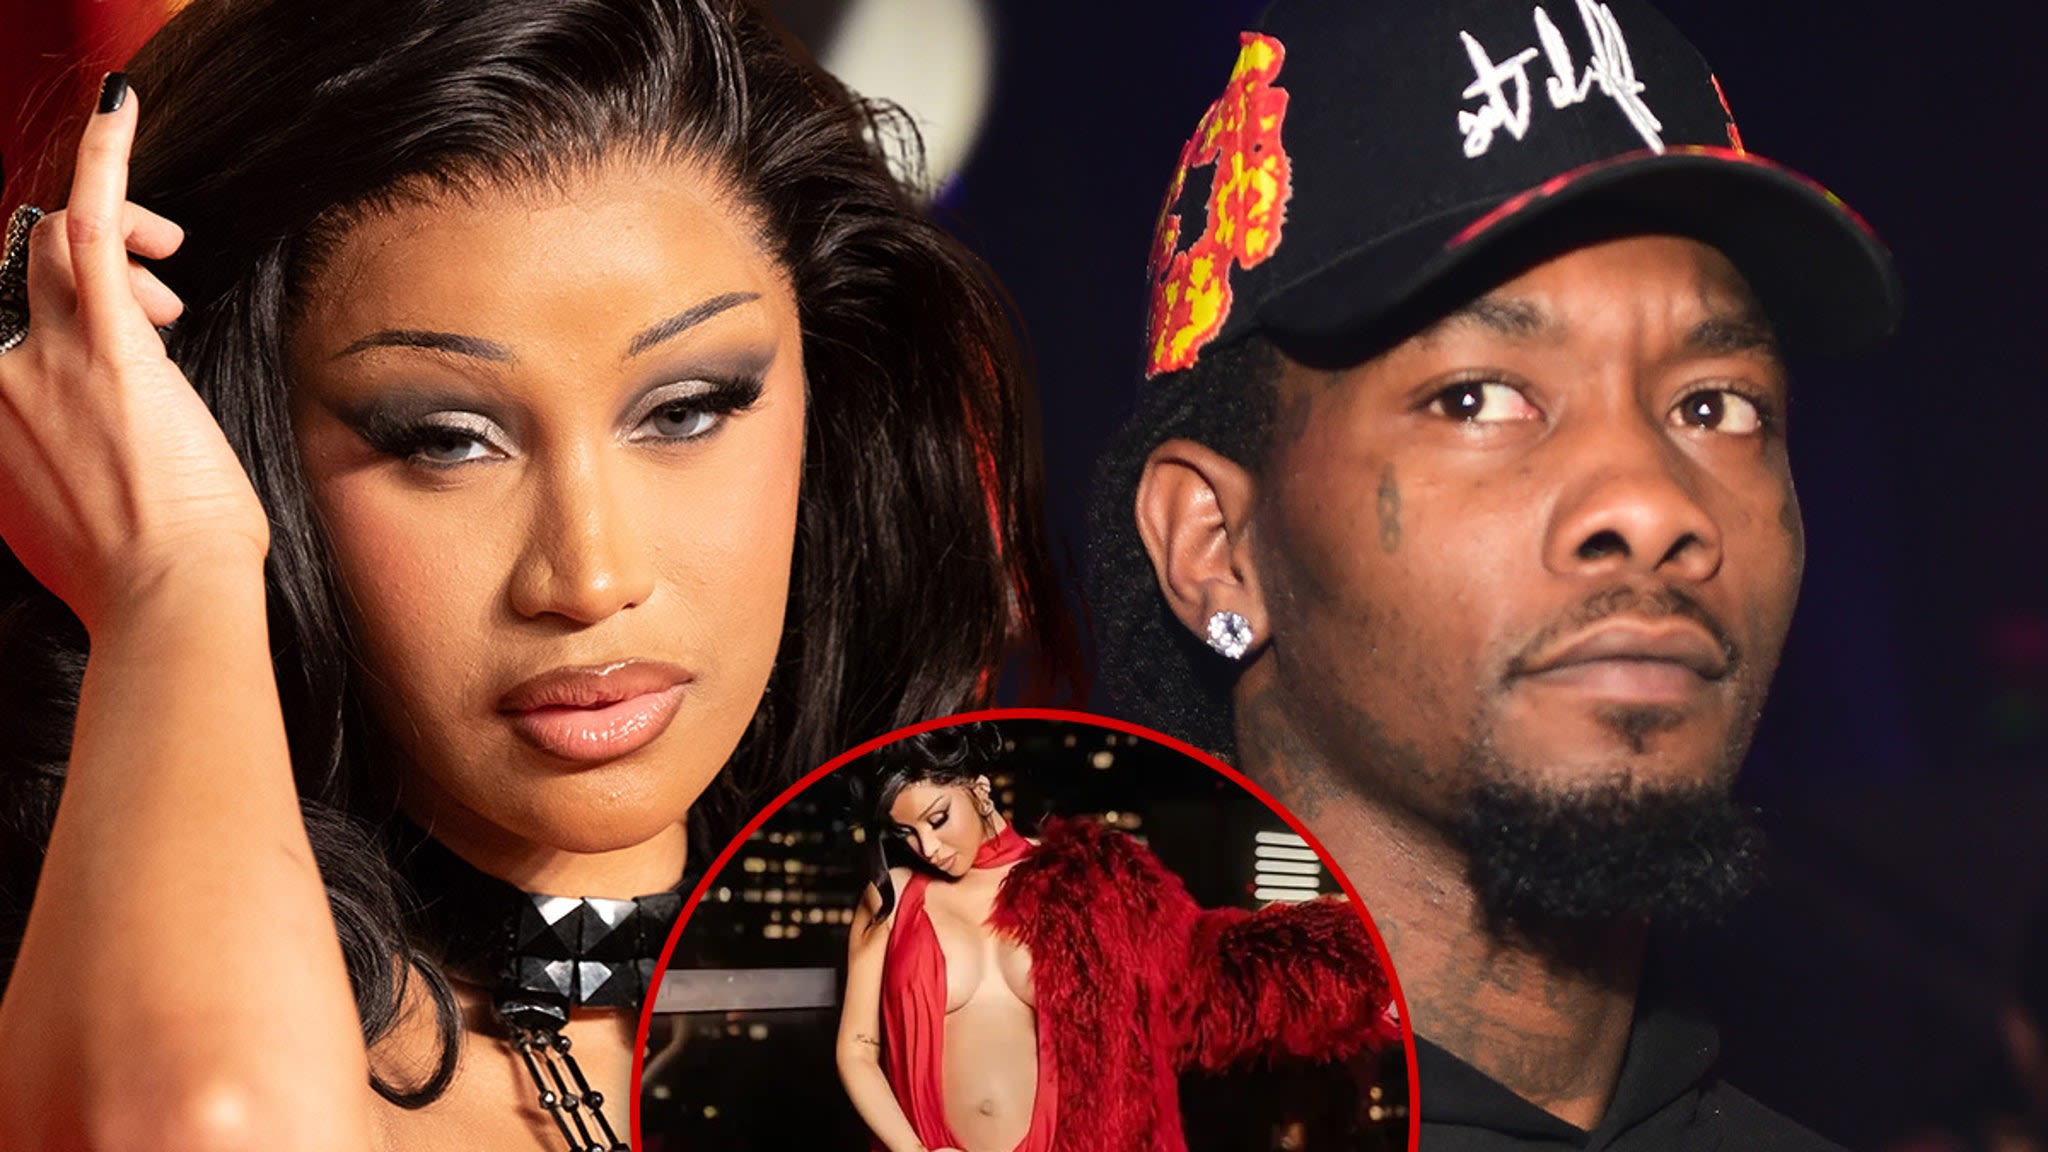 Cardi B's Divorce Docs Show Offset is Father of Third Baby, She Wants Child Support